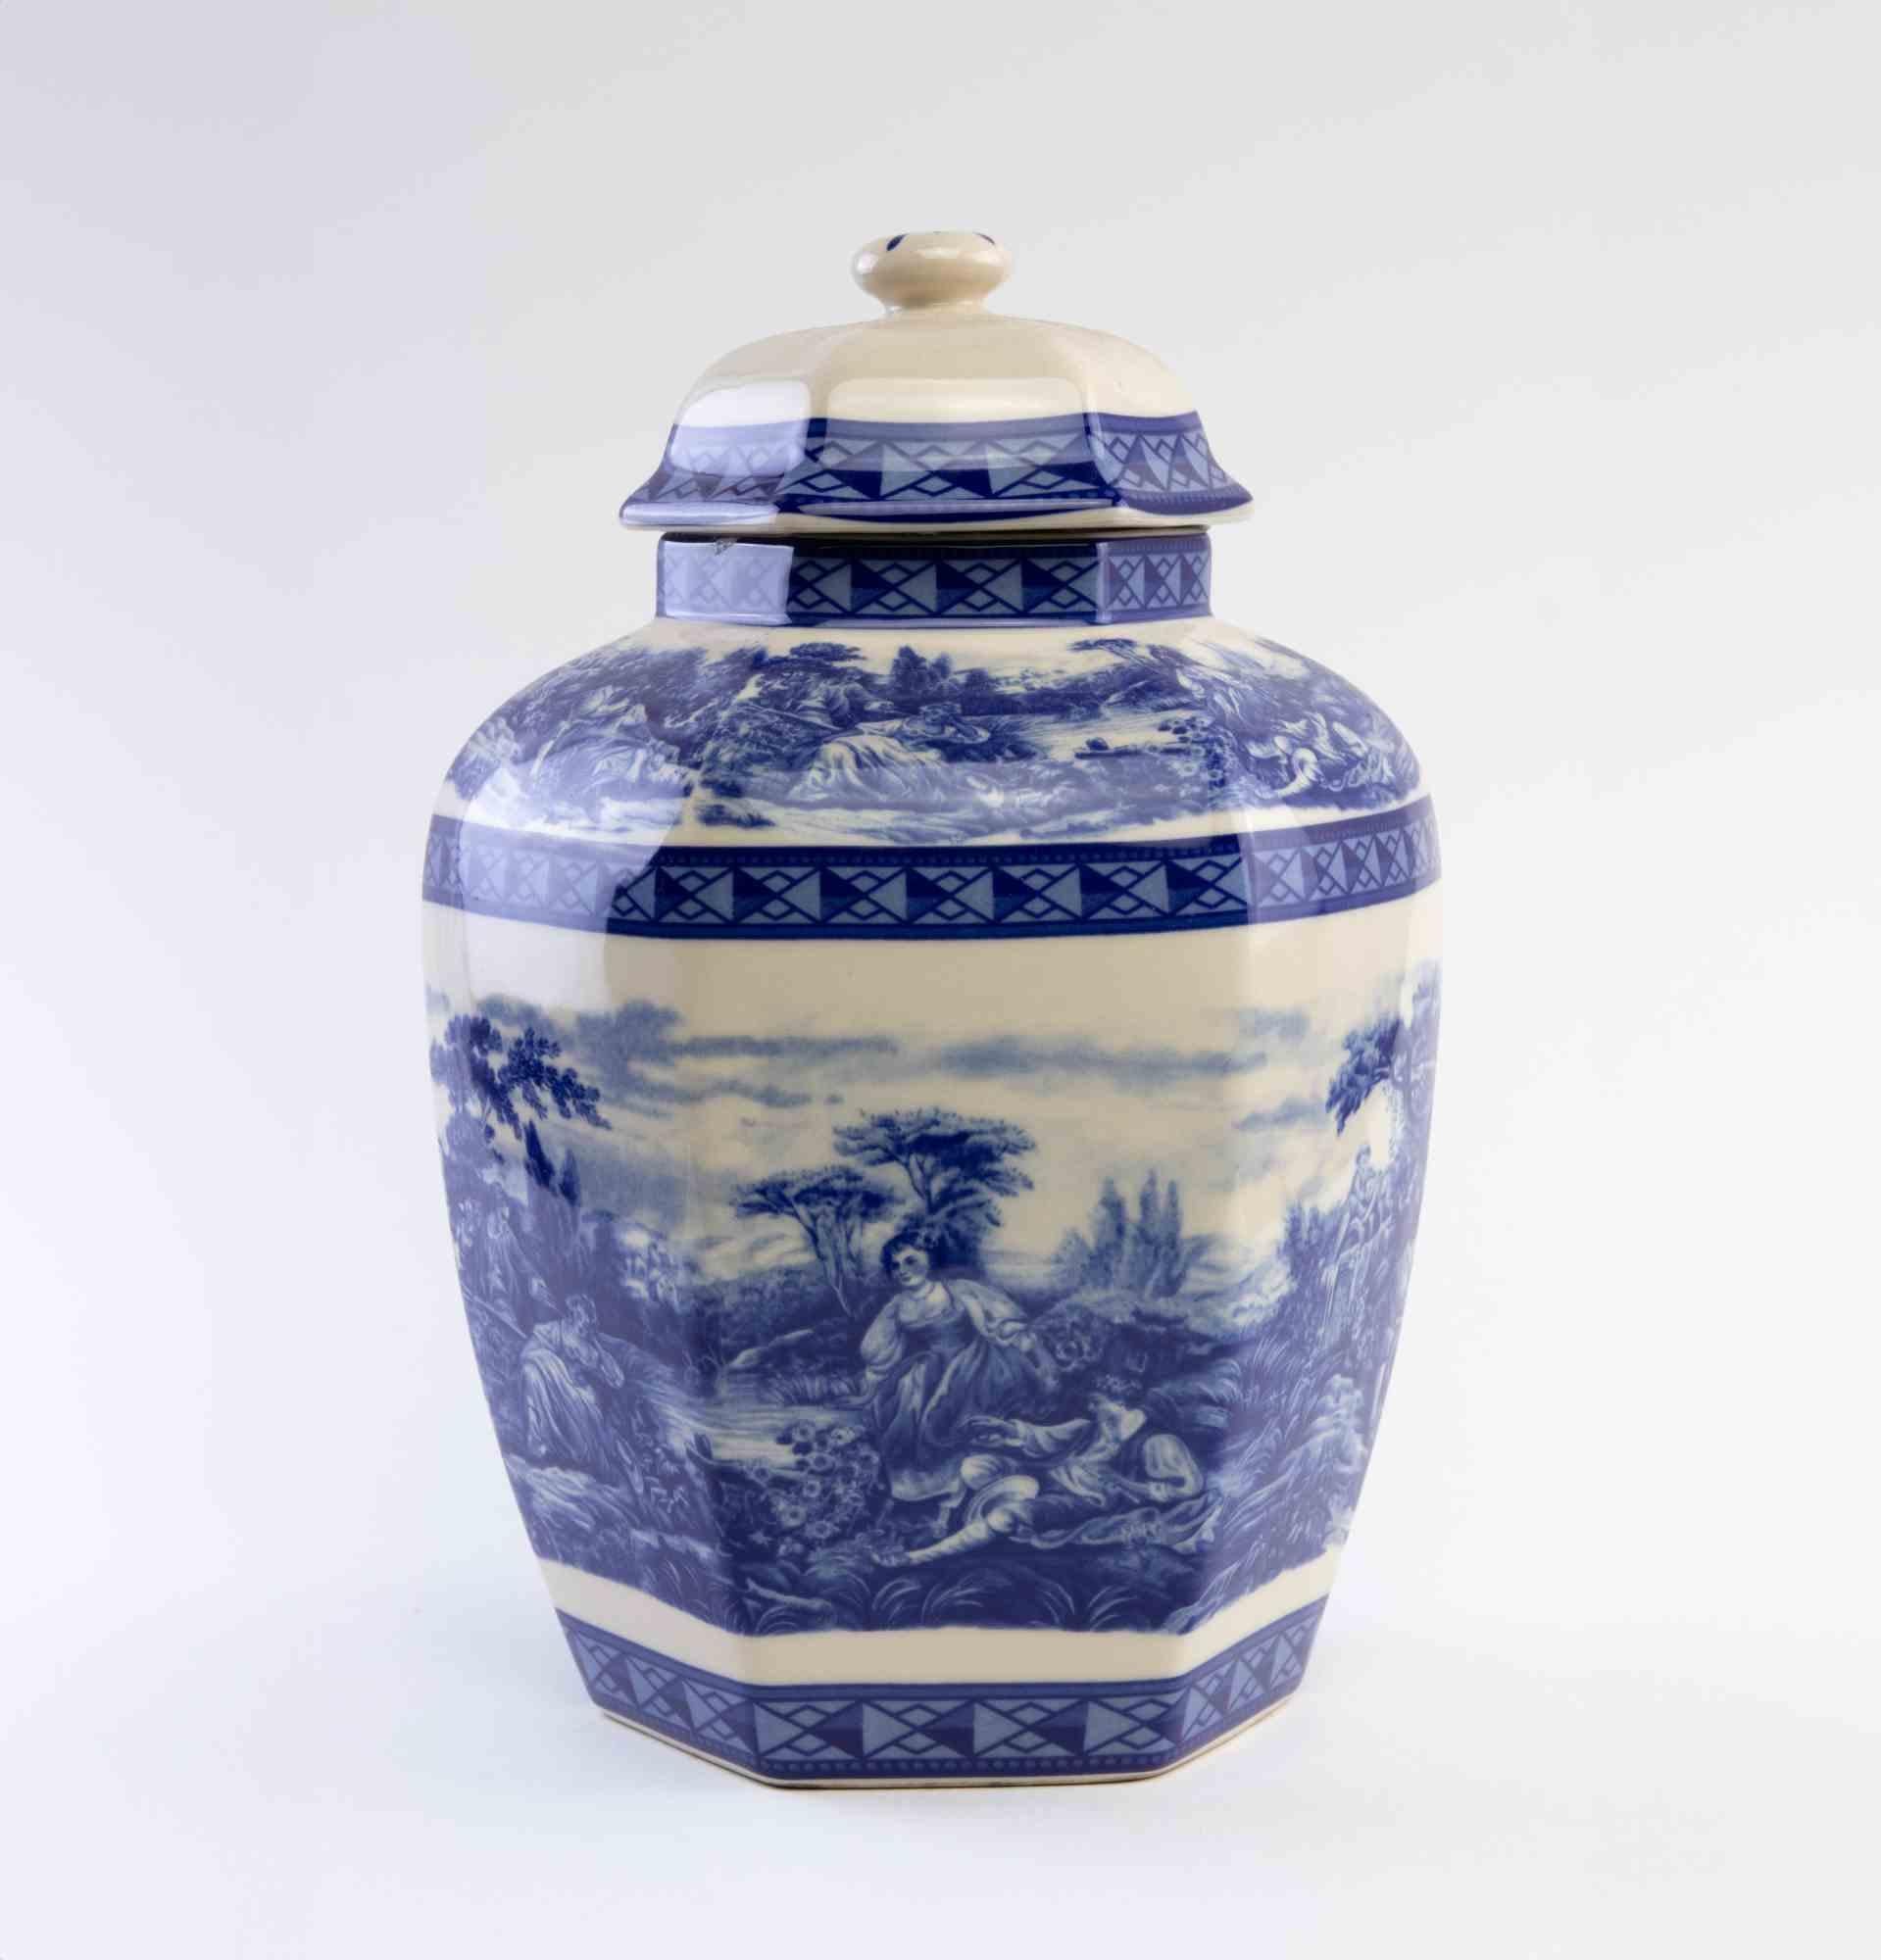 Ceramic Blue Decorative Object  is an elegant decorative object realized in the early 20th century.

A very elegant cand refined porcelain ornamental object with cover decorated with romantic blue colored genre scene.

A perfect object to add